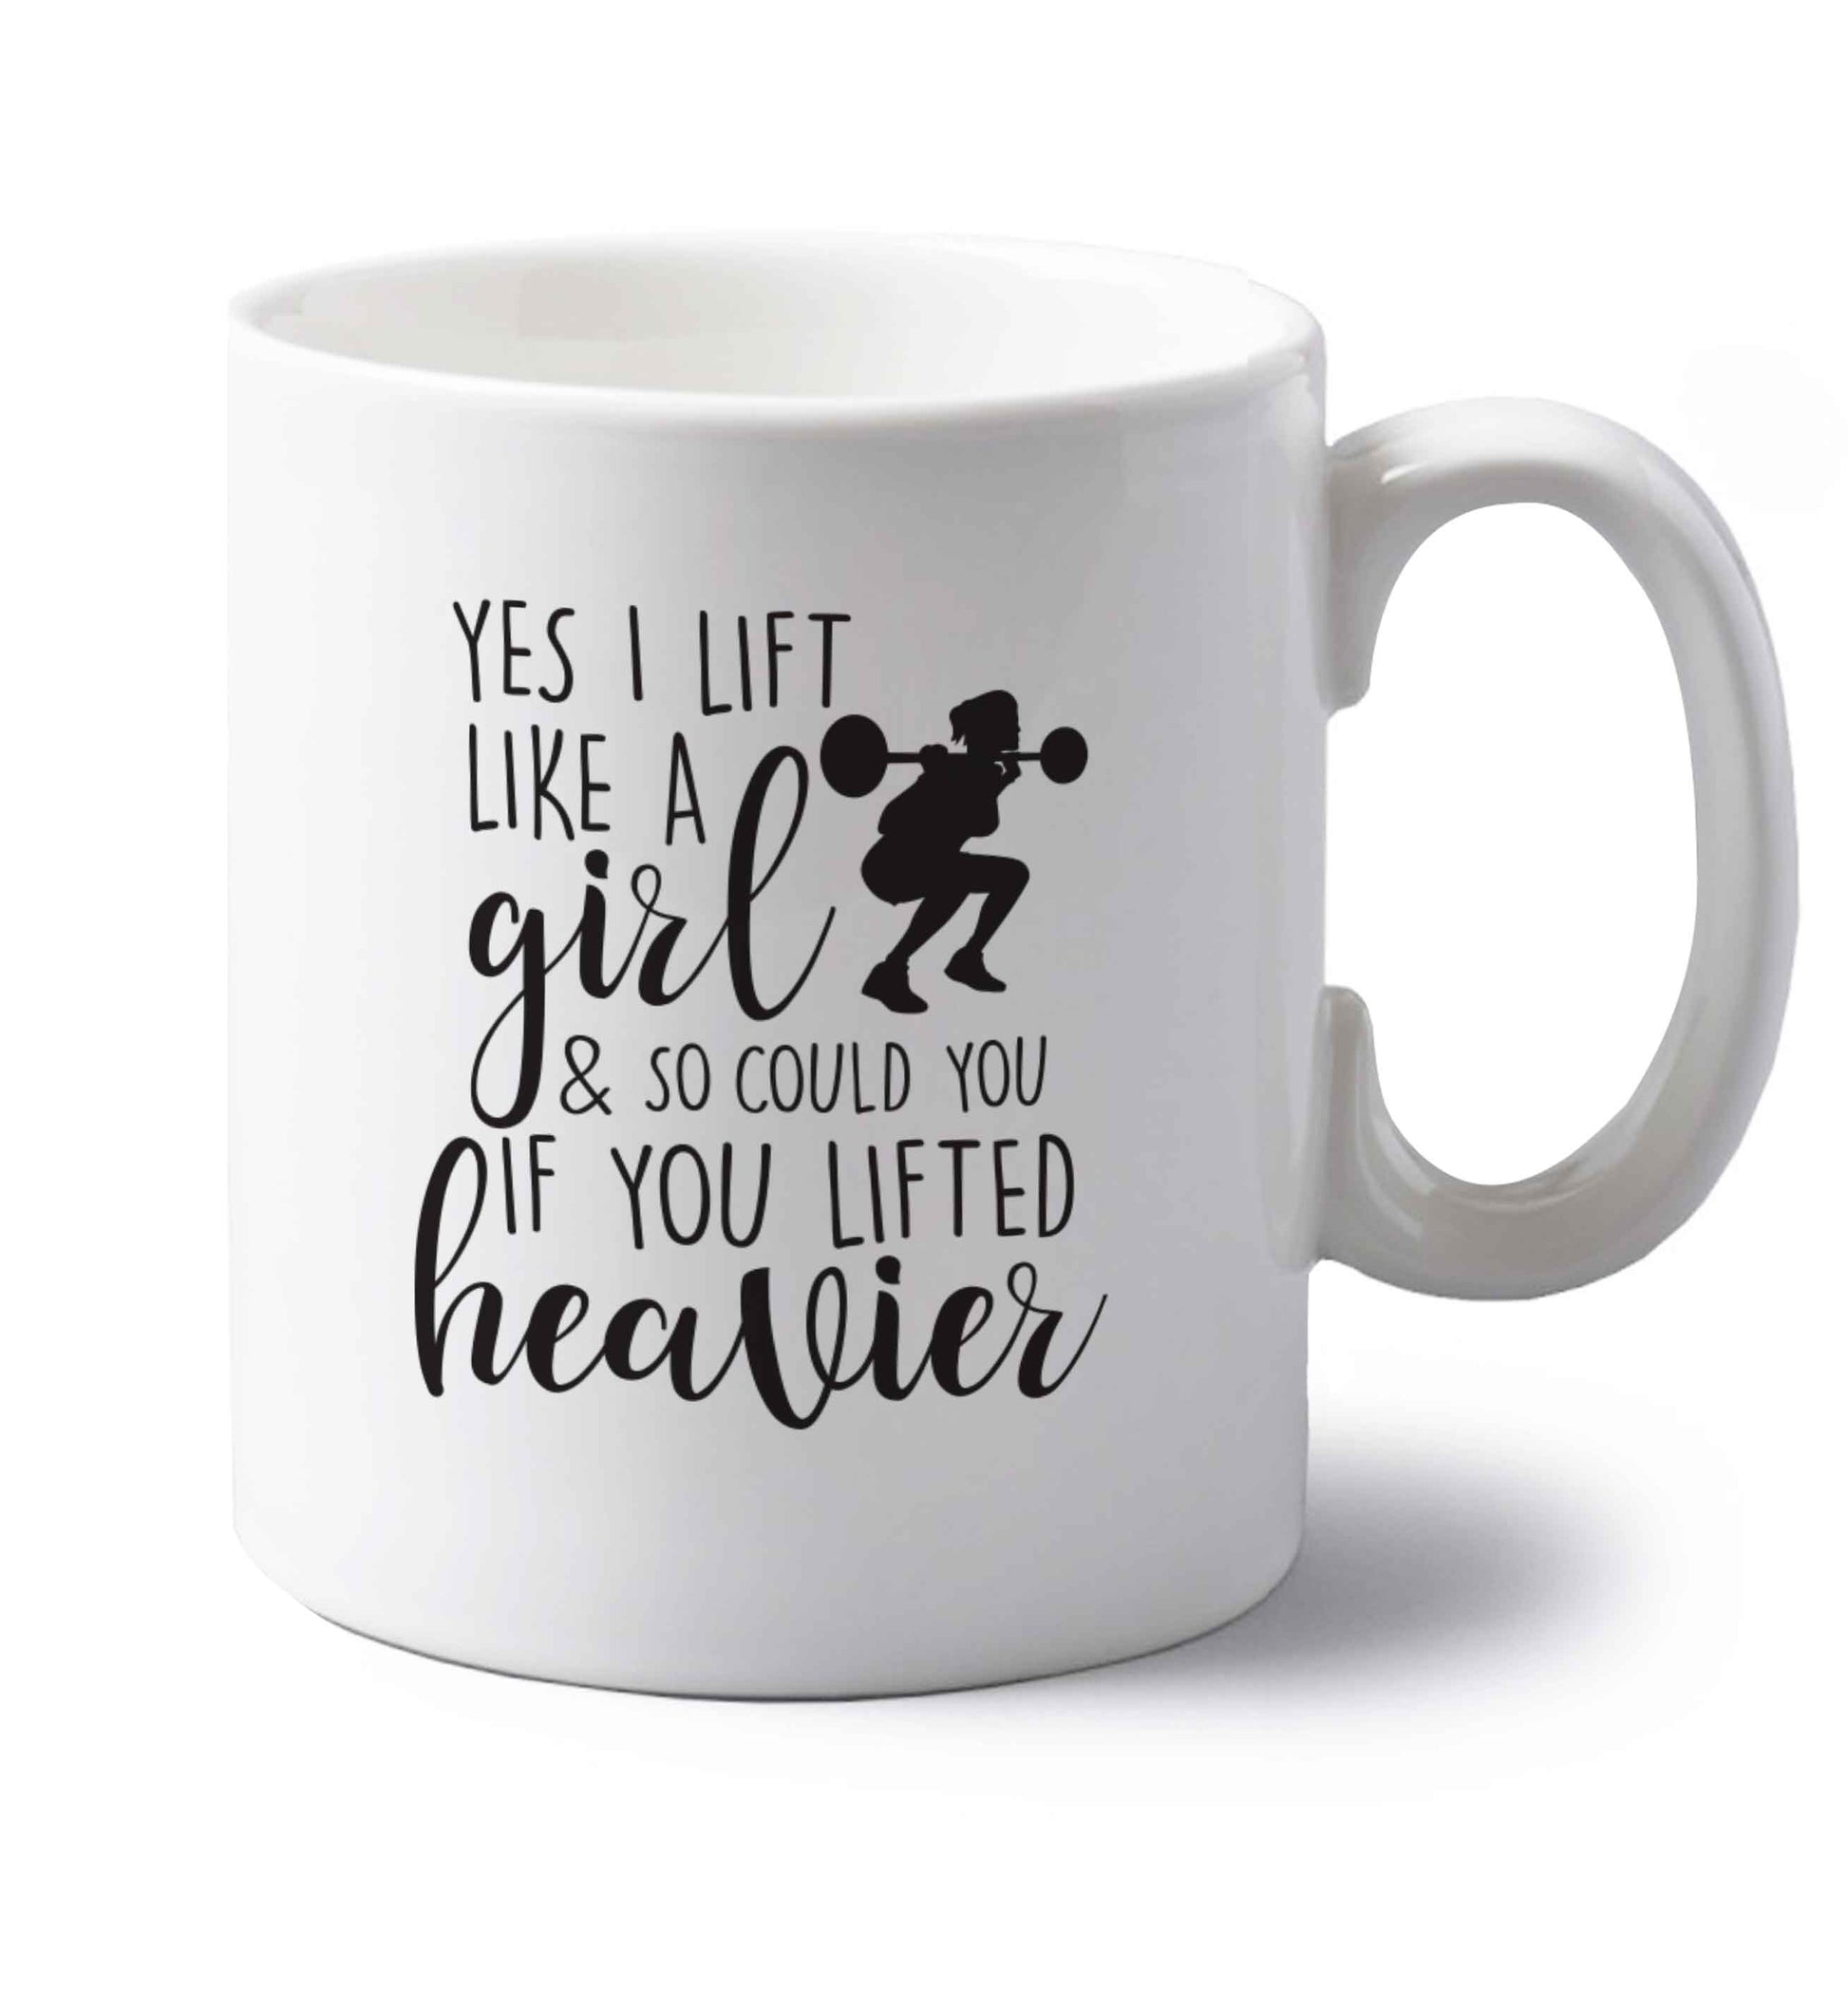 Yes I lift like a girl and so could you if you lifted heavier left handed white ceramic mug 